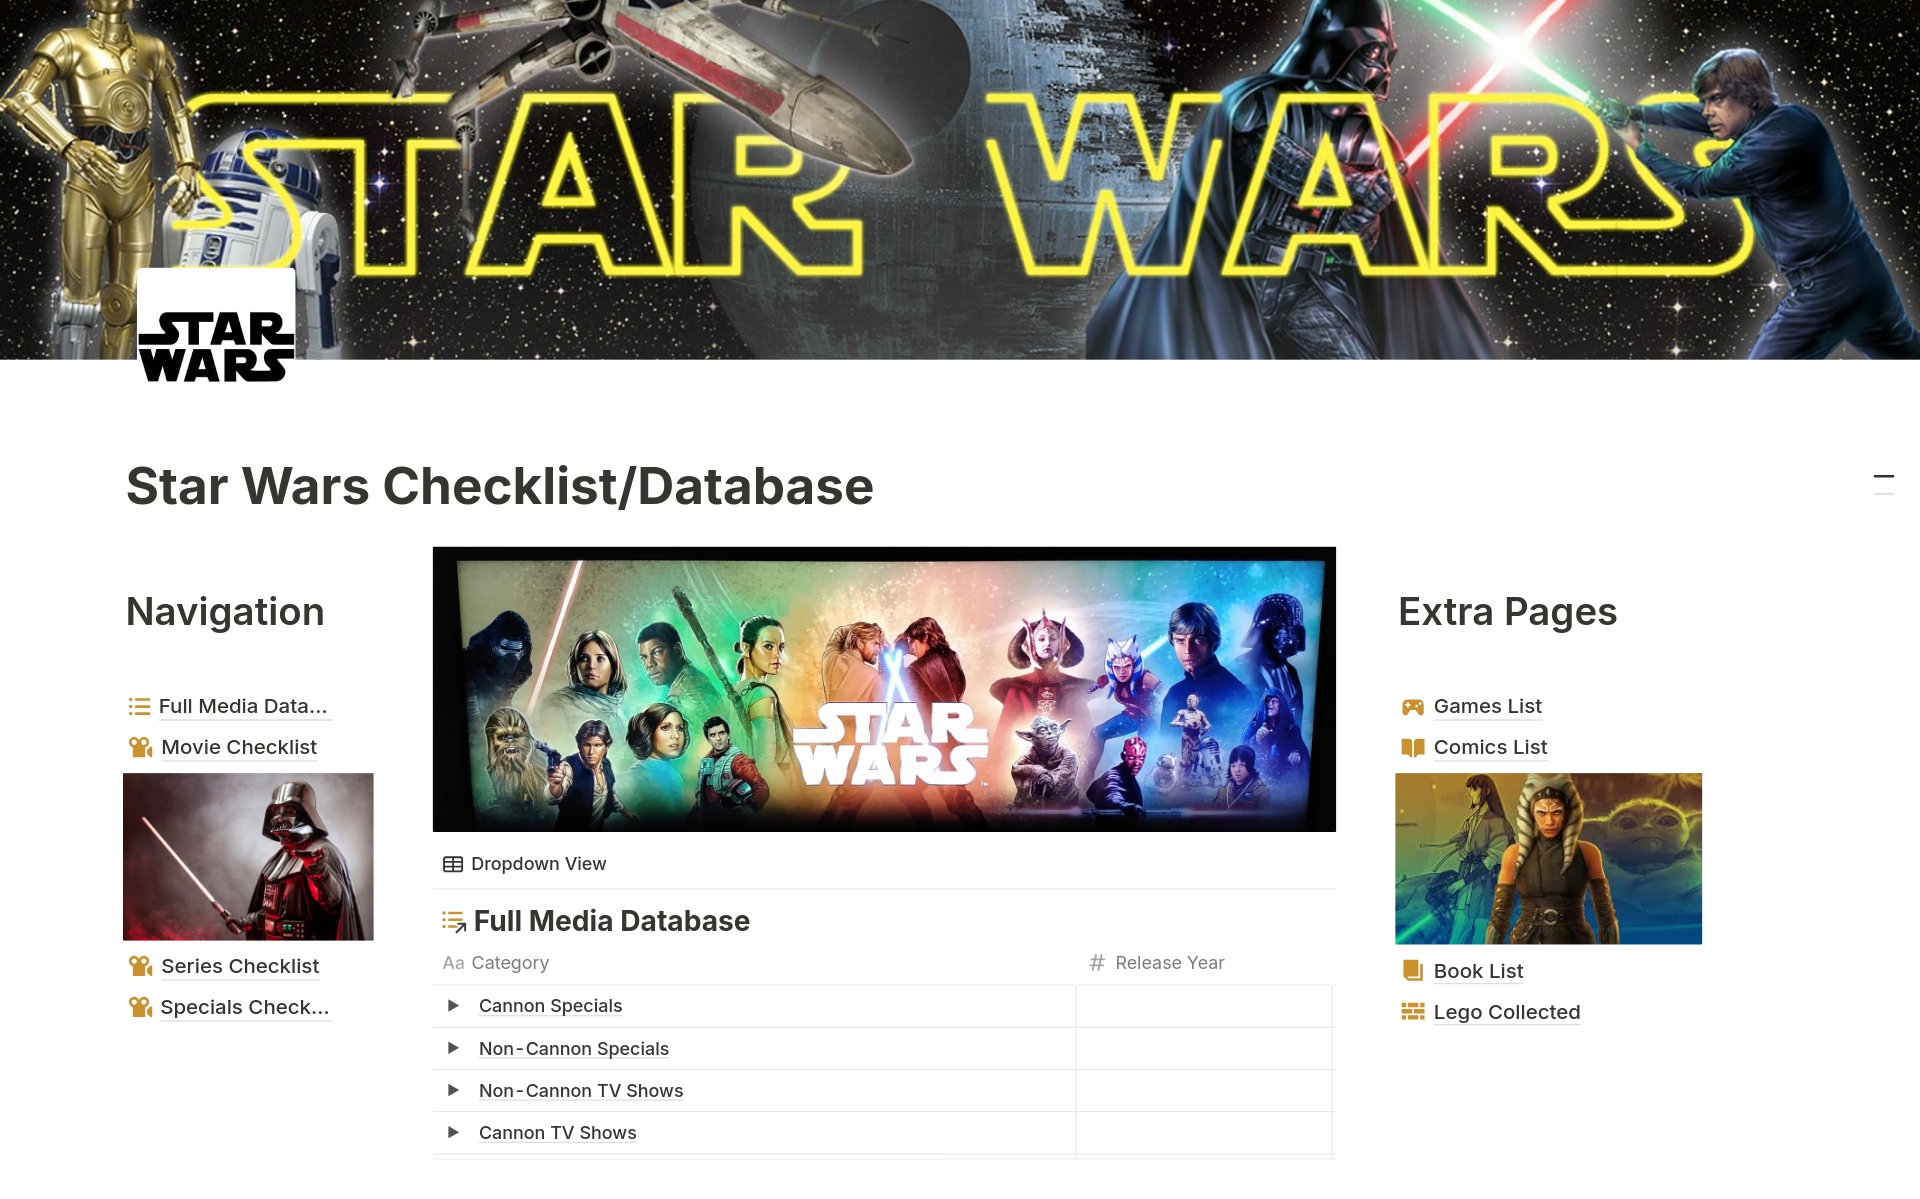 You'll get a Star Wars tracker with up-to-date media information including a full list of every movie and series (with full episode titles) in 4 complete, ready to use databases. There are also more for you to easily track all other media.